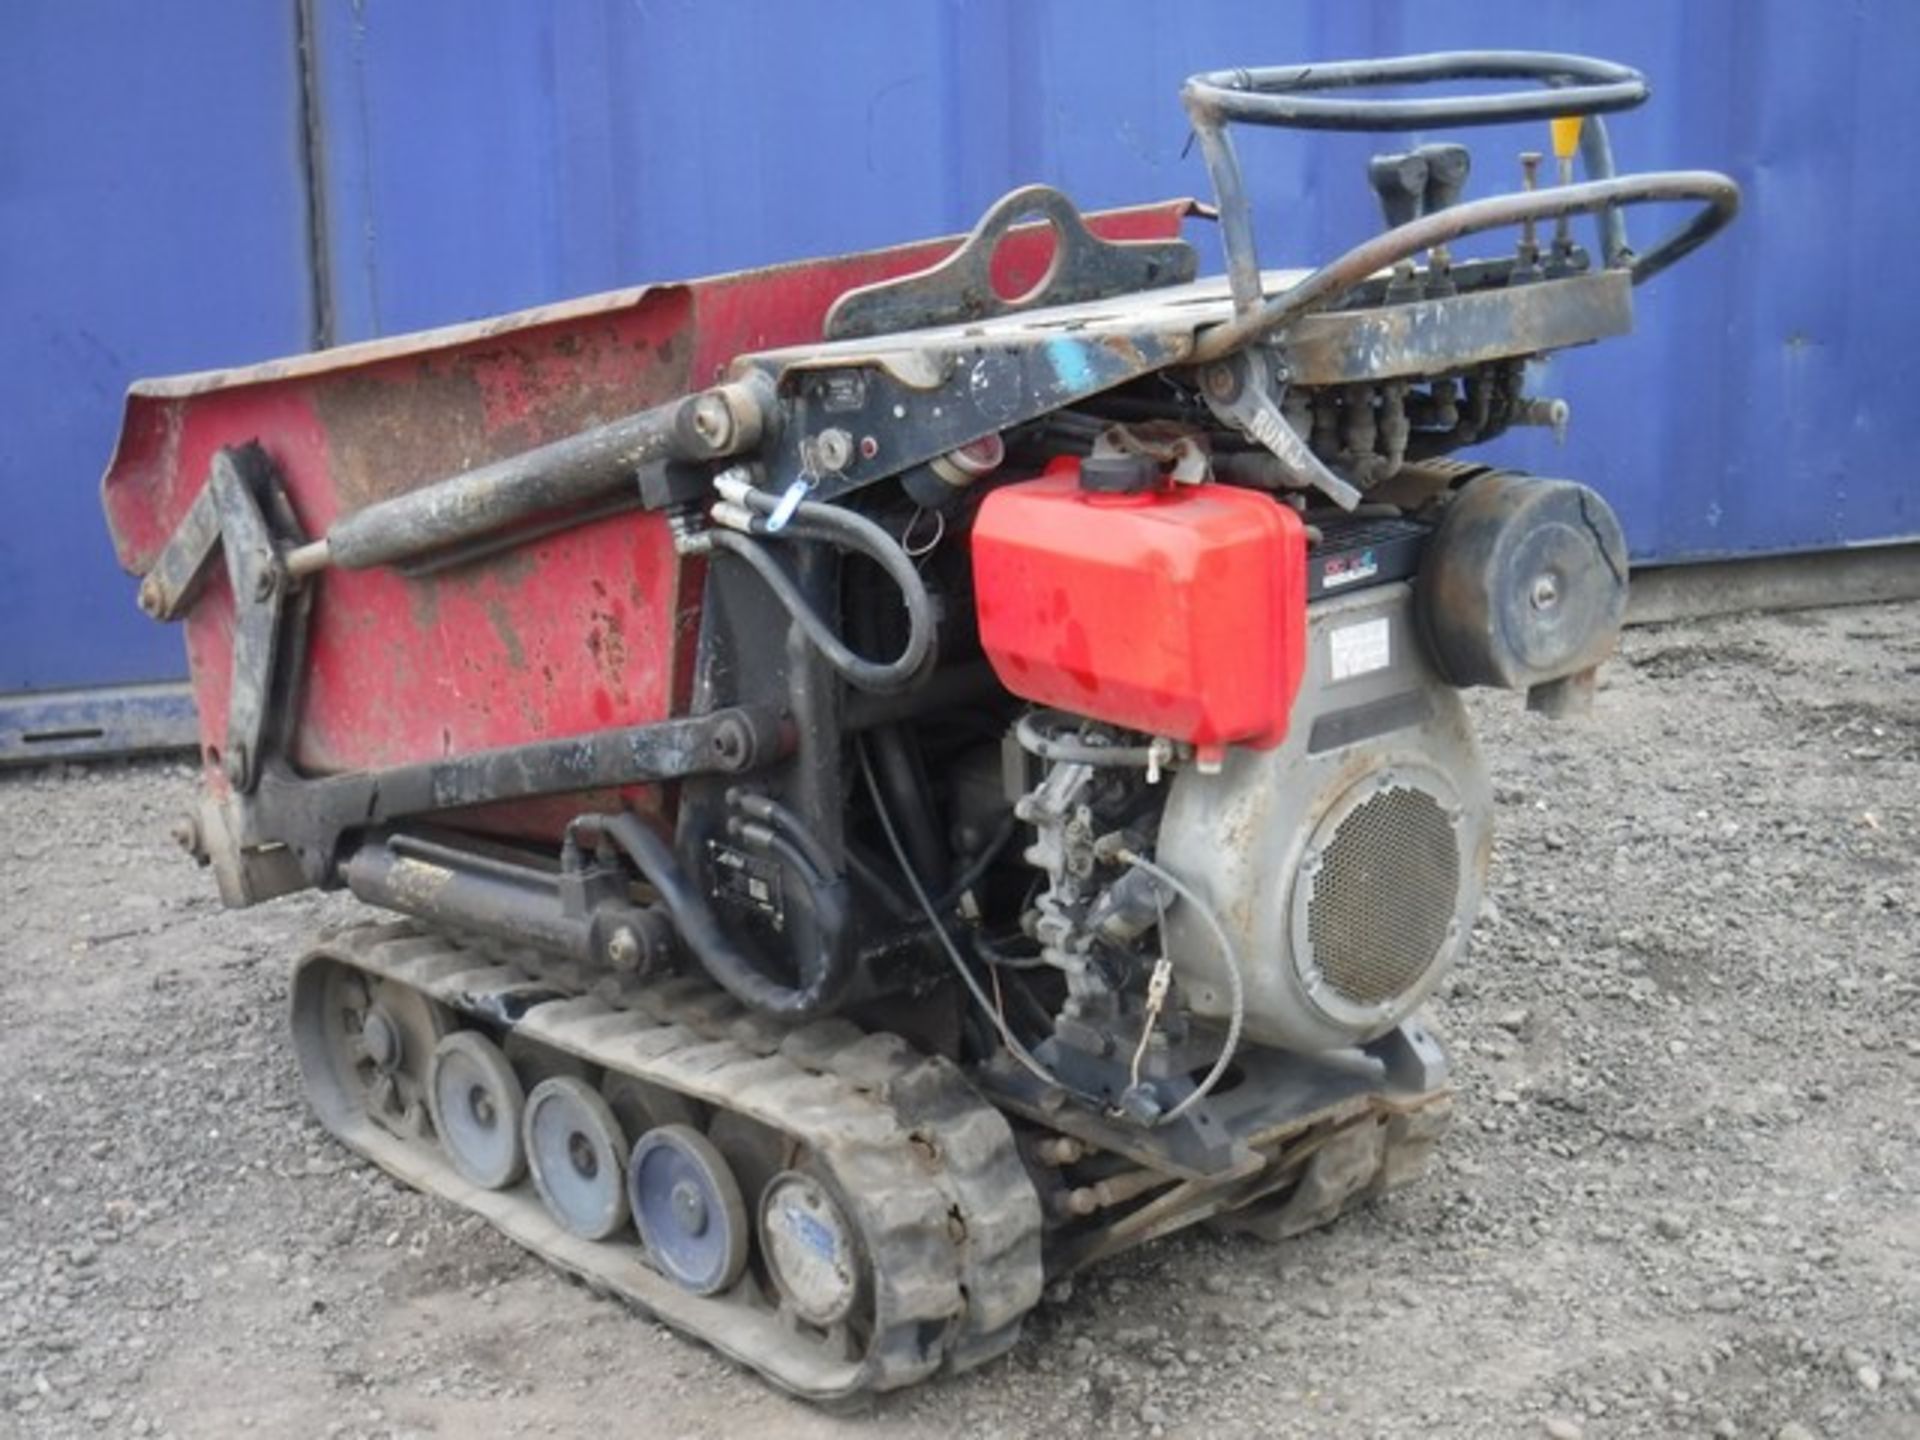 TCP HI- T500 HIGH TIP DIESEL POWER TRACK BARROW WITH KUBOTA ENGINE 2004 WITH 2380.7 HOURS SN- 81995 - Image 5 of 6